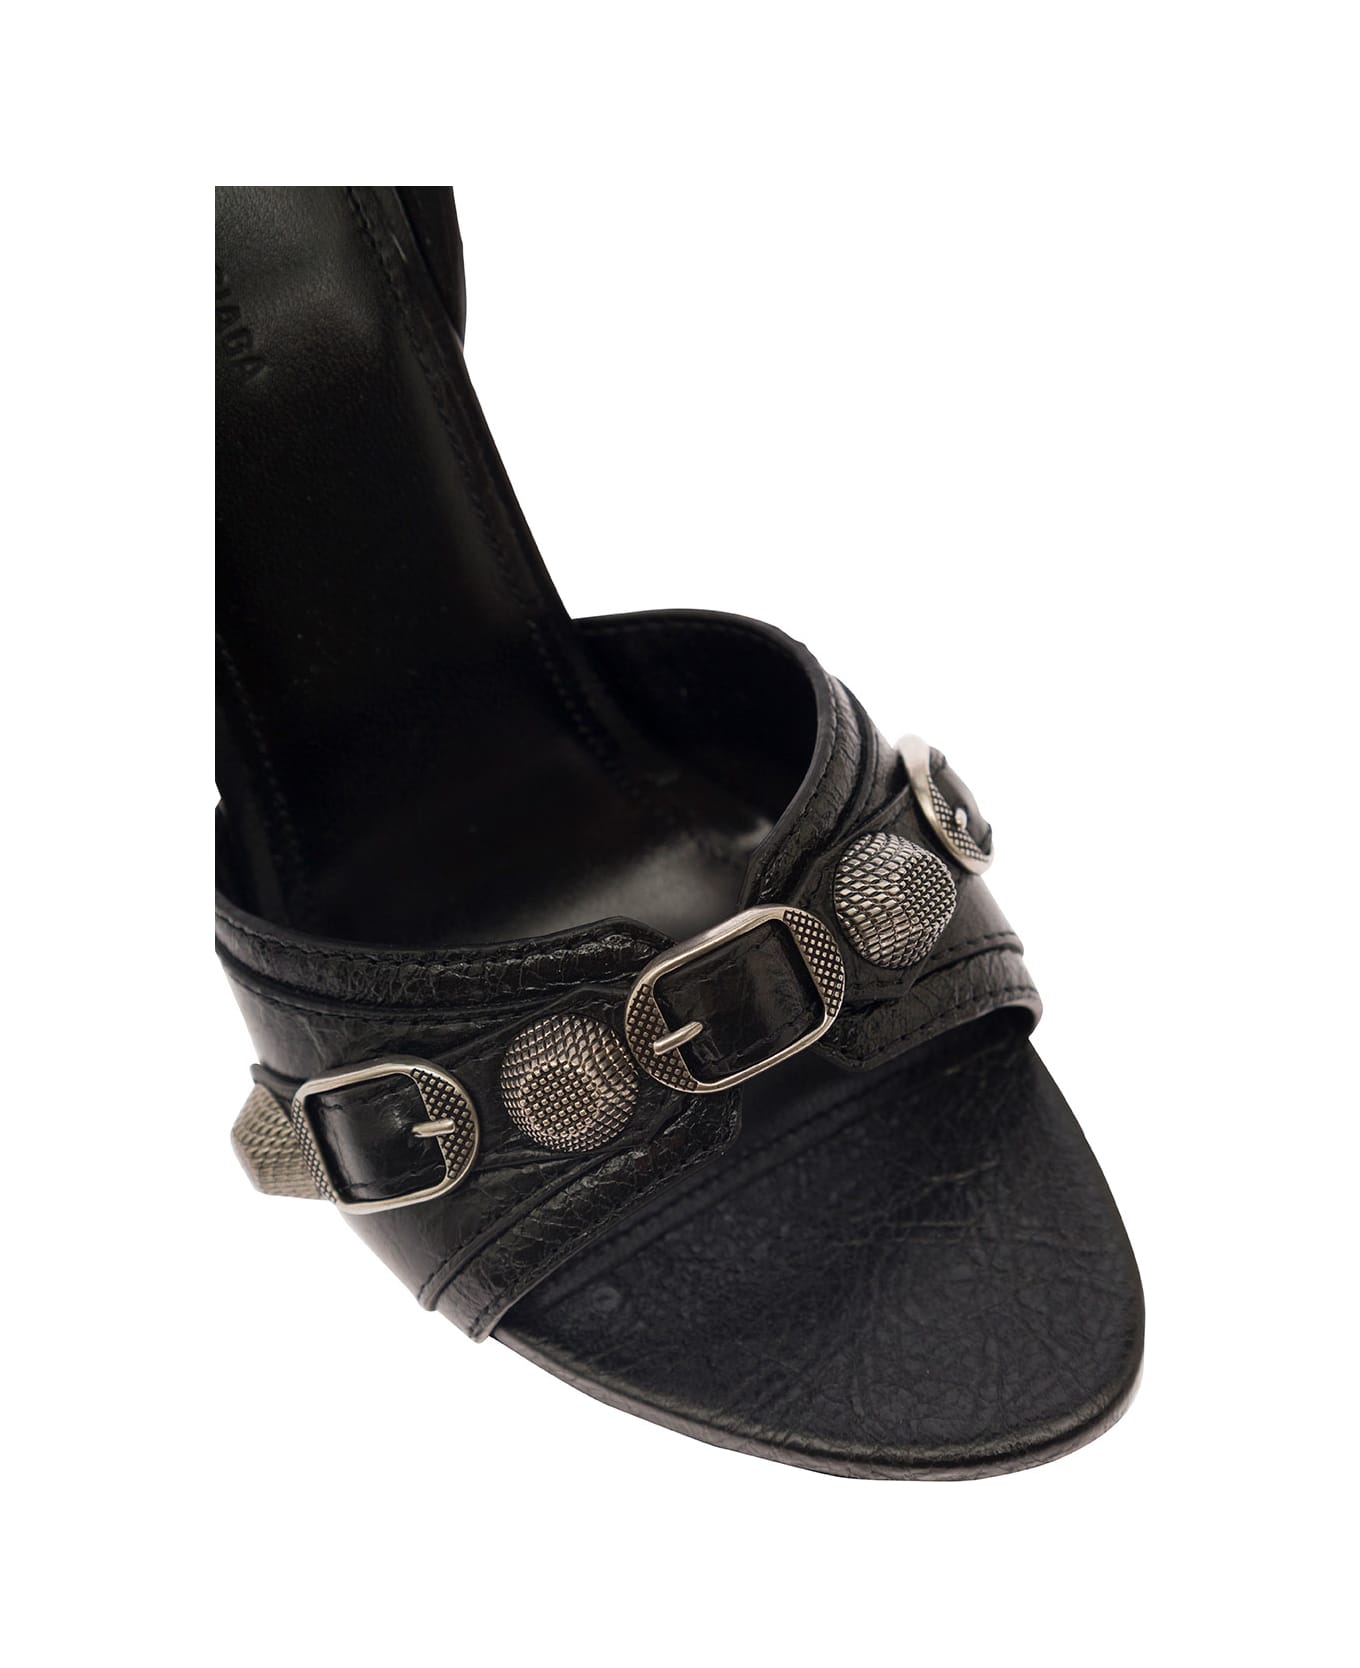 Balenciaga 'cagole' Black Sandals With Studs And Buckles In Leather Woman - Black サンダル